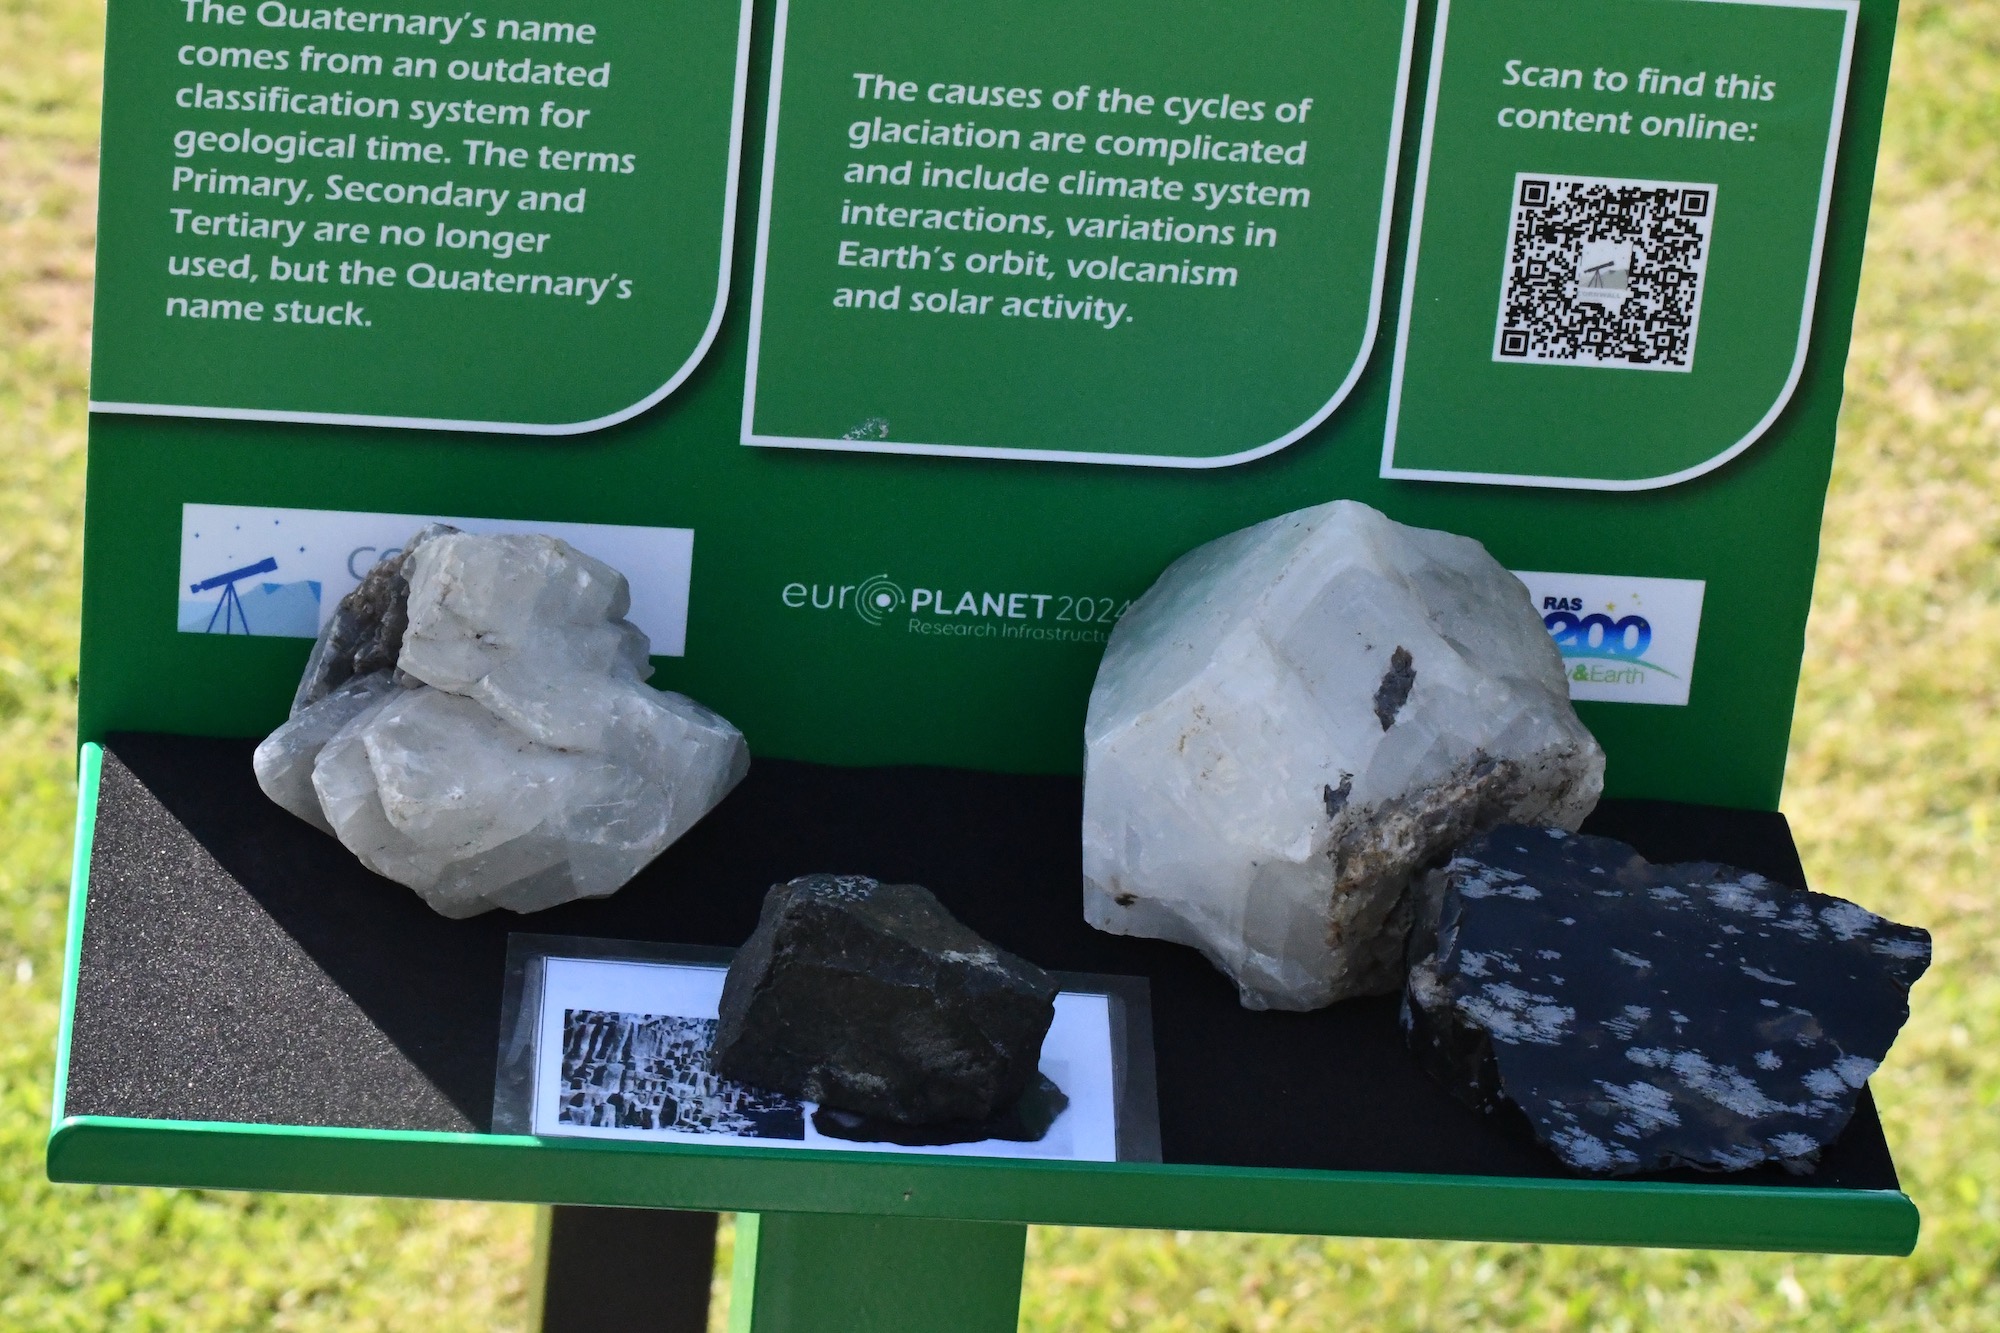 Each sign in the Earth Story trail comes with a shelf that can be used to hold rock samples to illustrate the geology of the eon, era or geological period described.